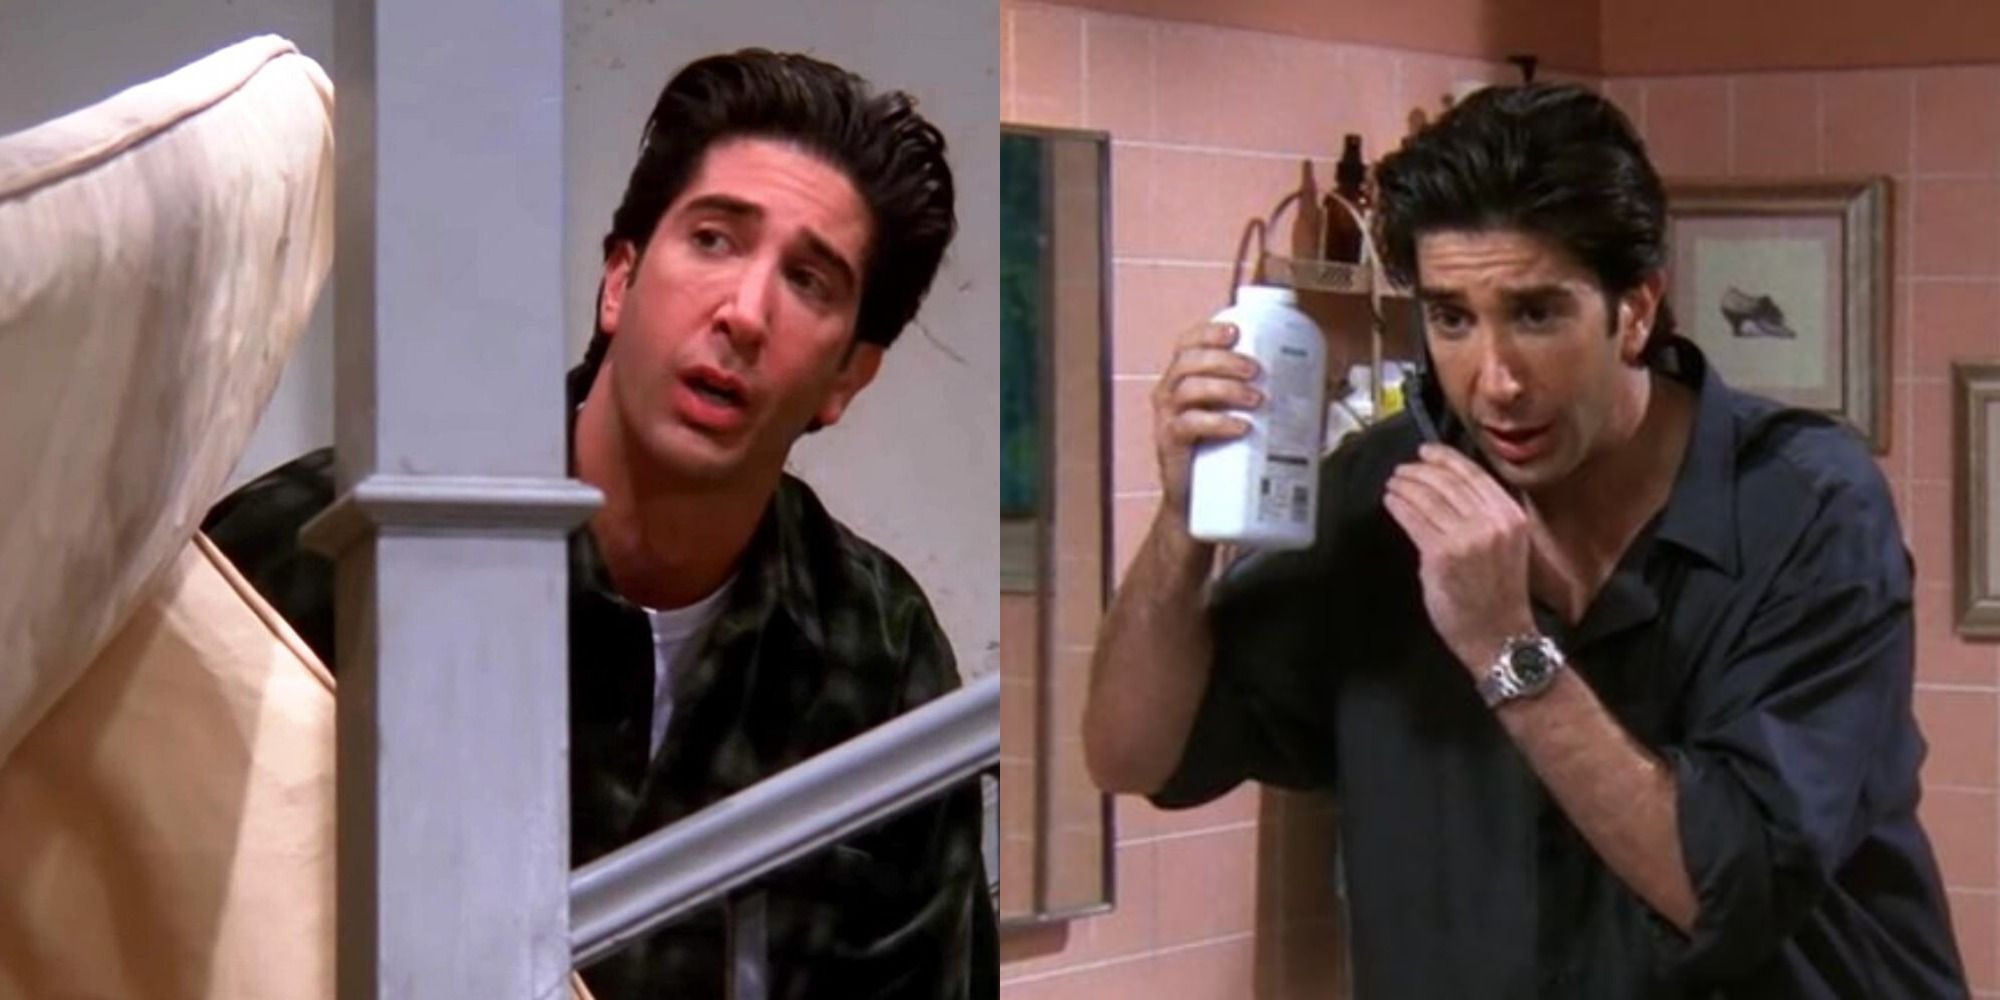 Friends” - Ross and his leather pants #davidschwimmer #pastepants #ma... |  TikTok